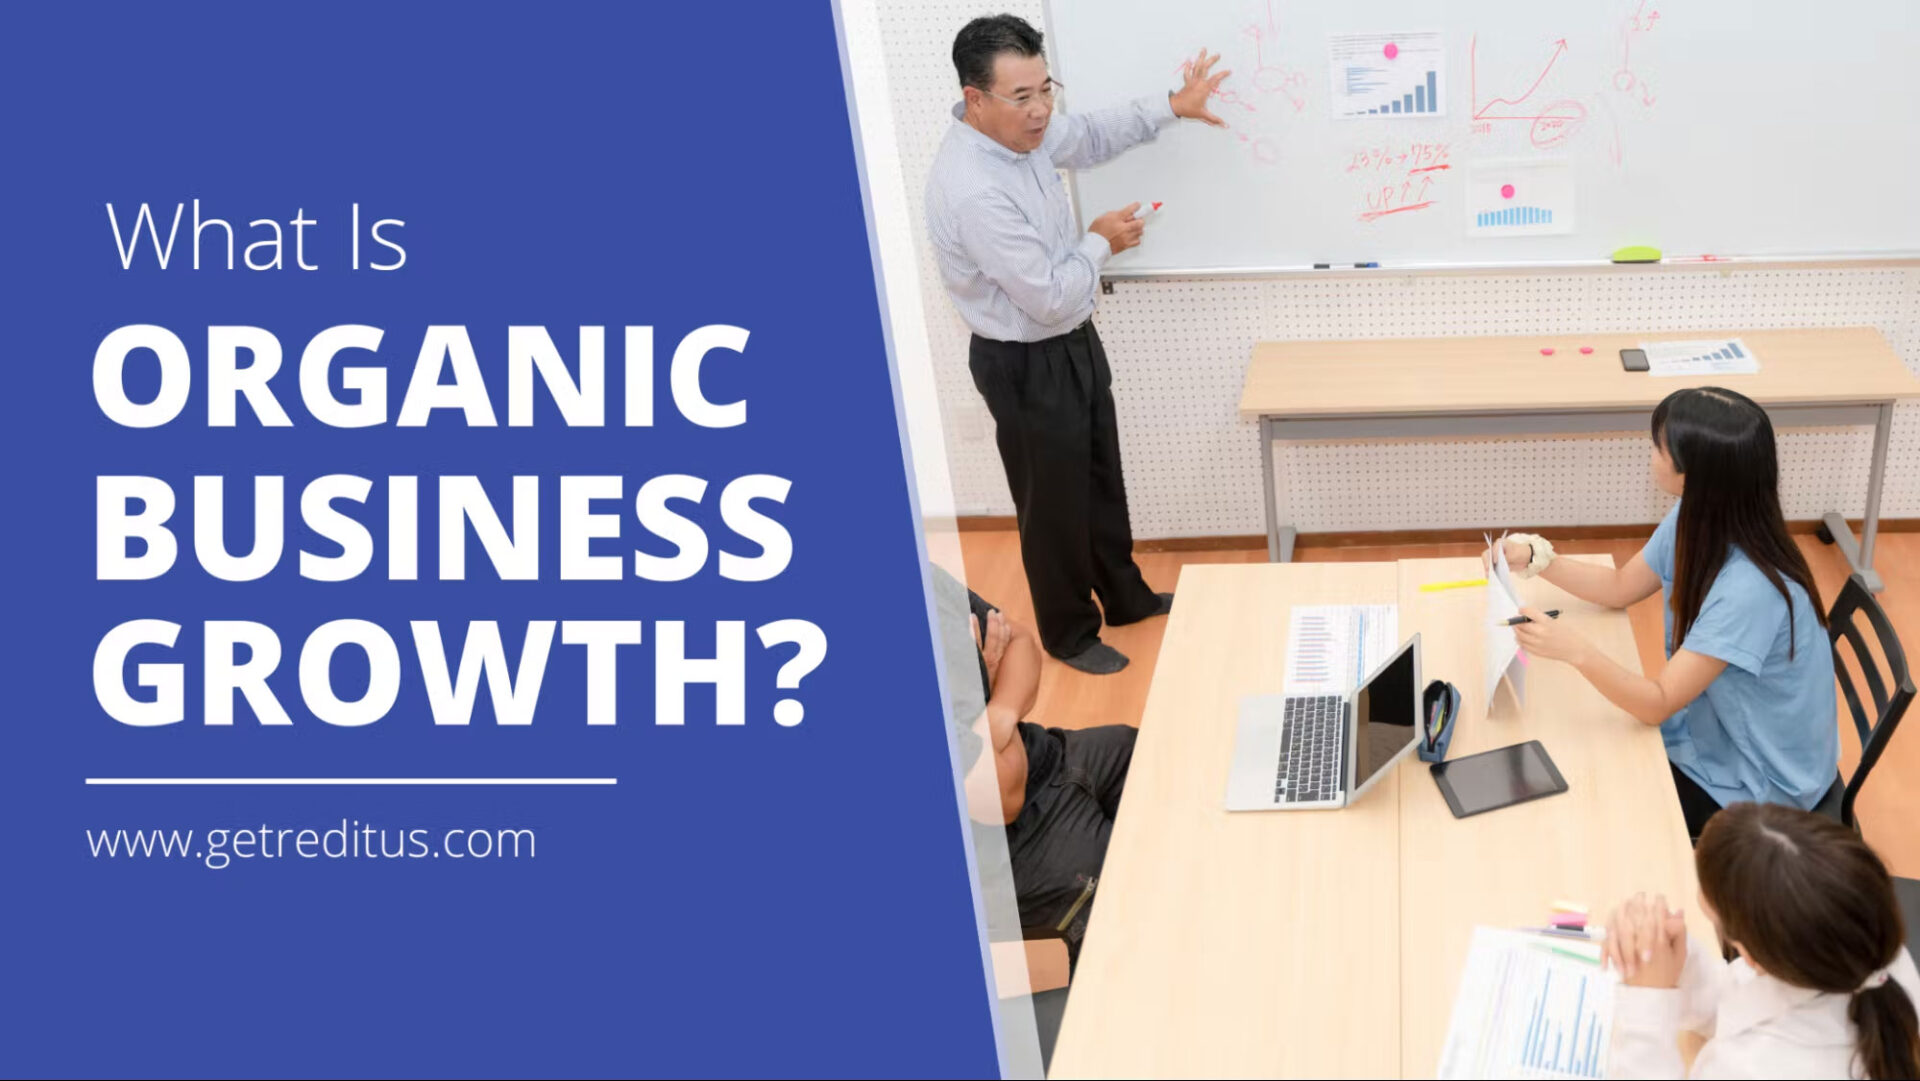 https://www.getreditus.com/blog/what-is-organic-business-growth-your-playbook/